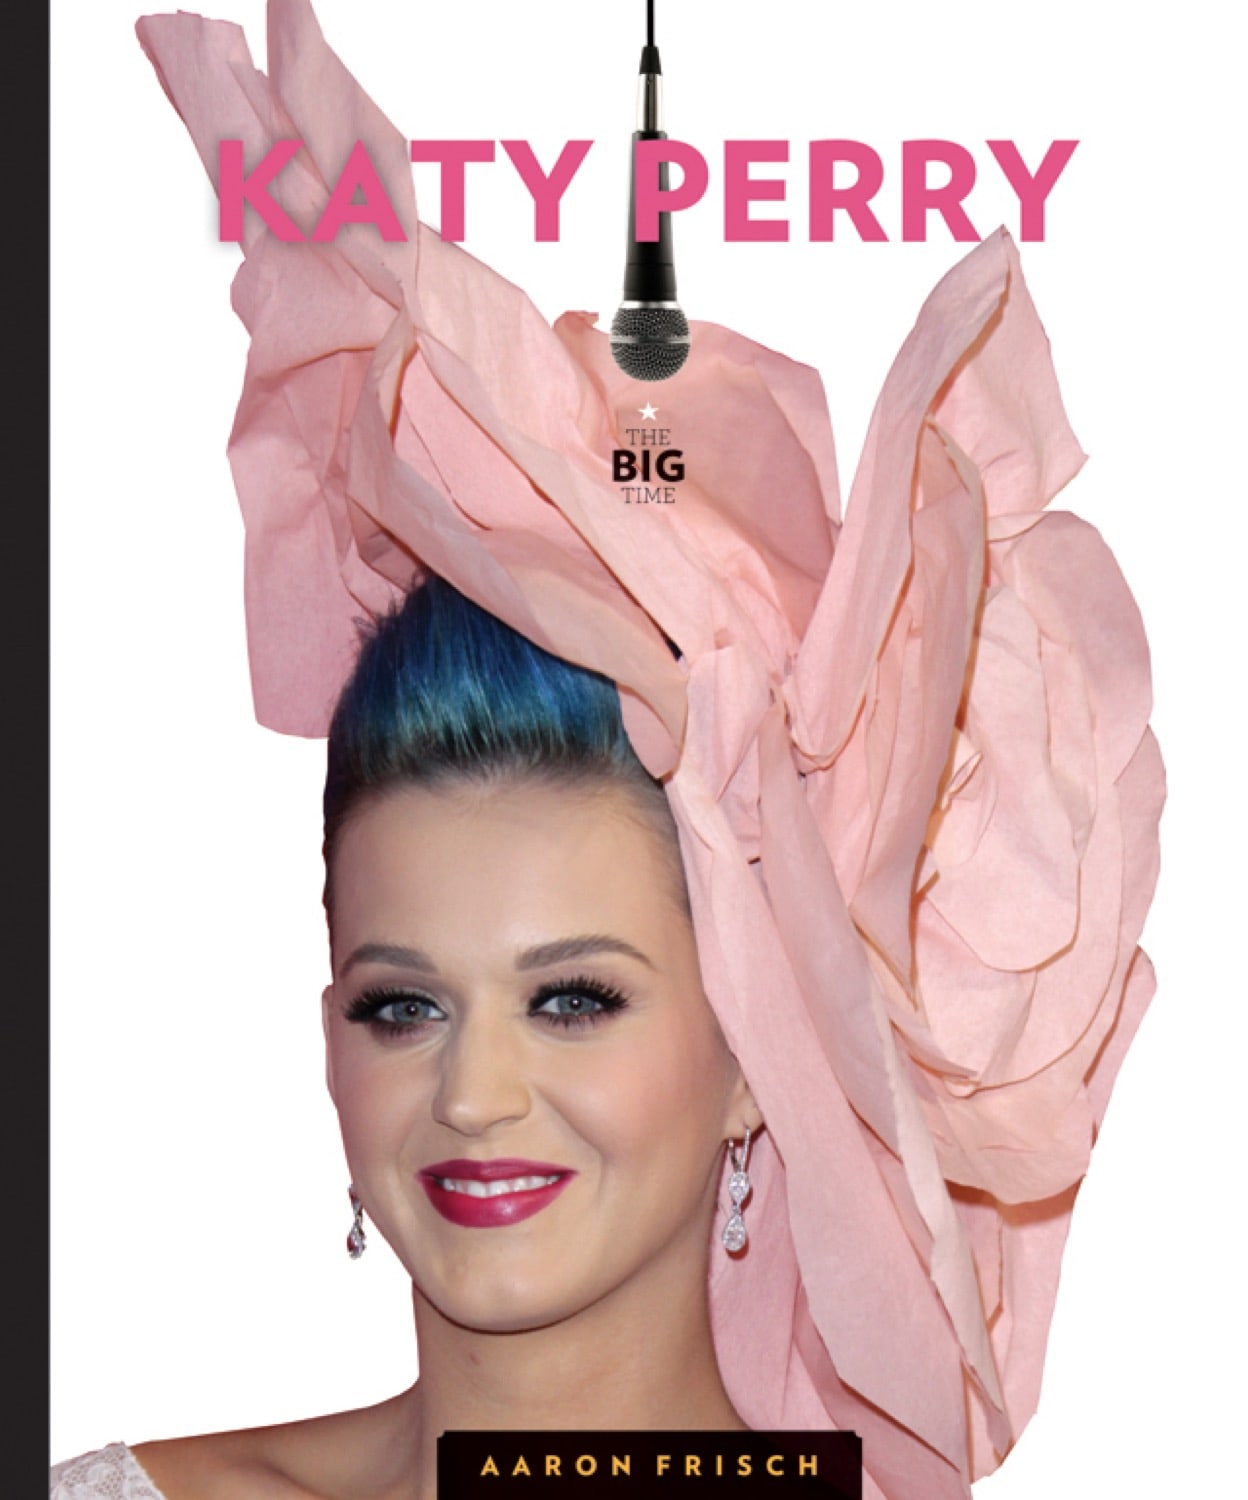 The Big Time: Katy Perry